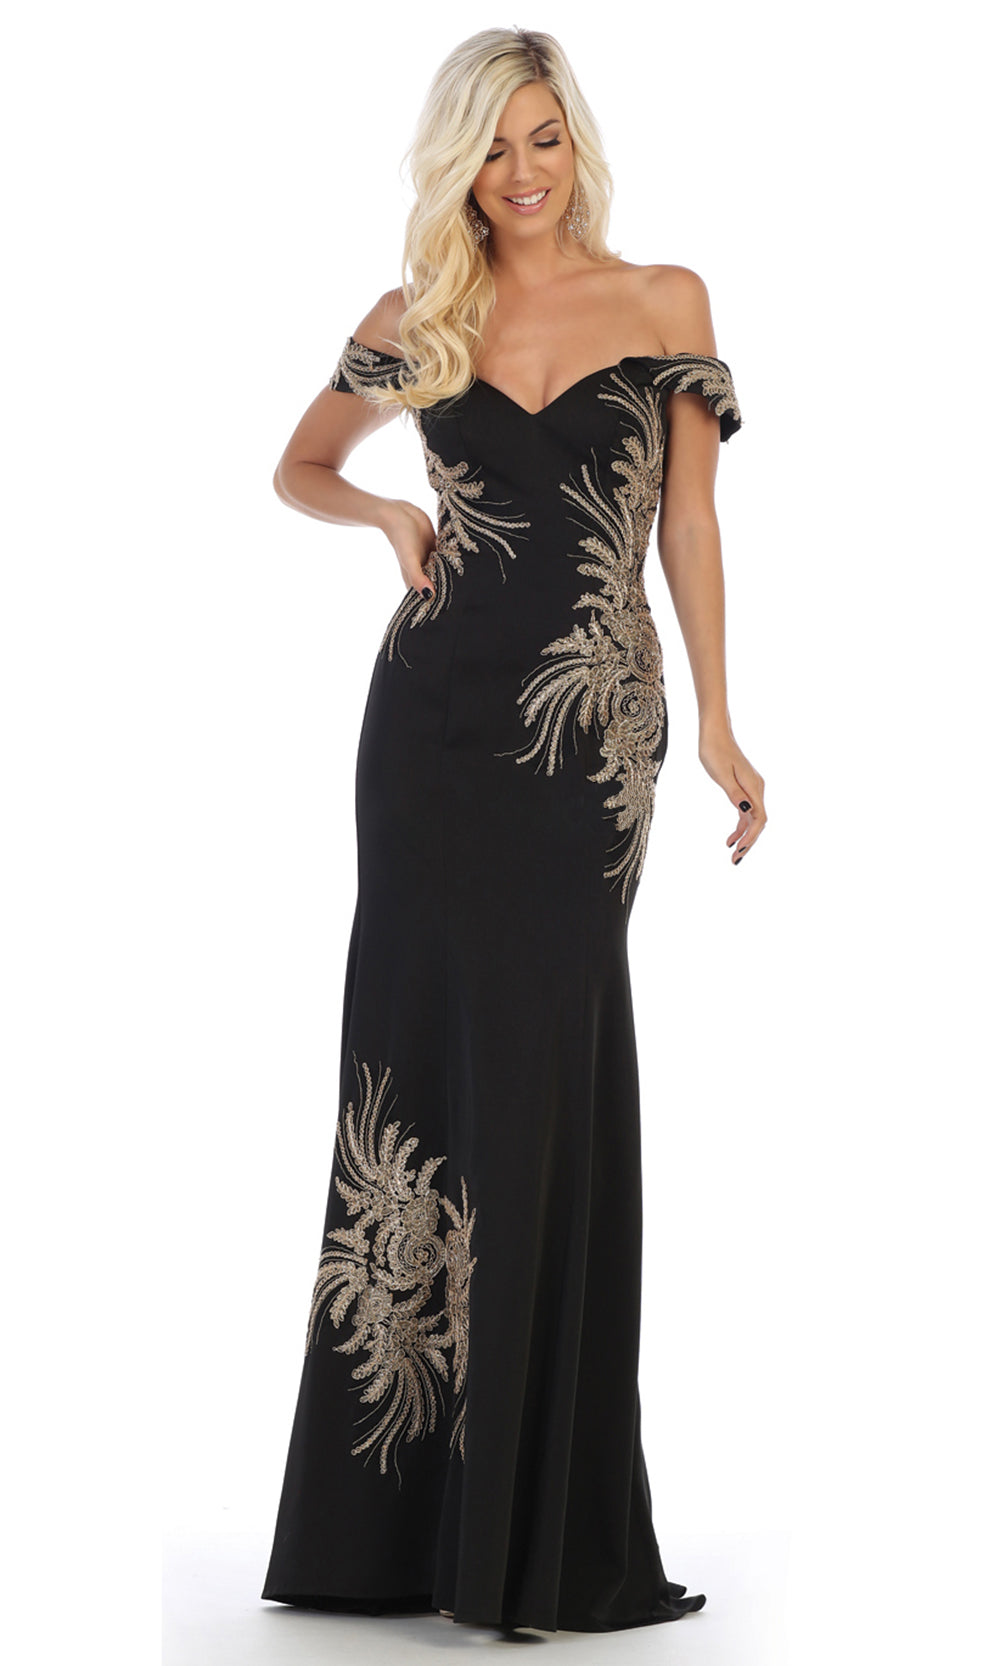 May Queen - RQ7712 Beaded Sweetheart Trumpet Gown In Black